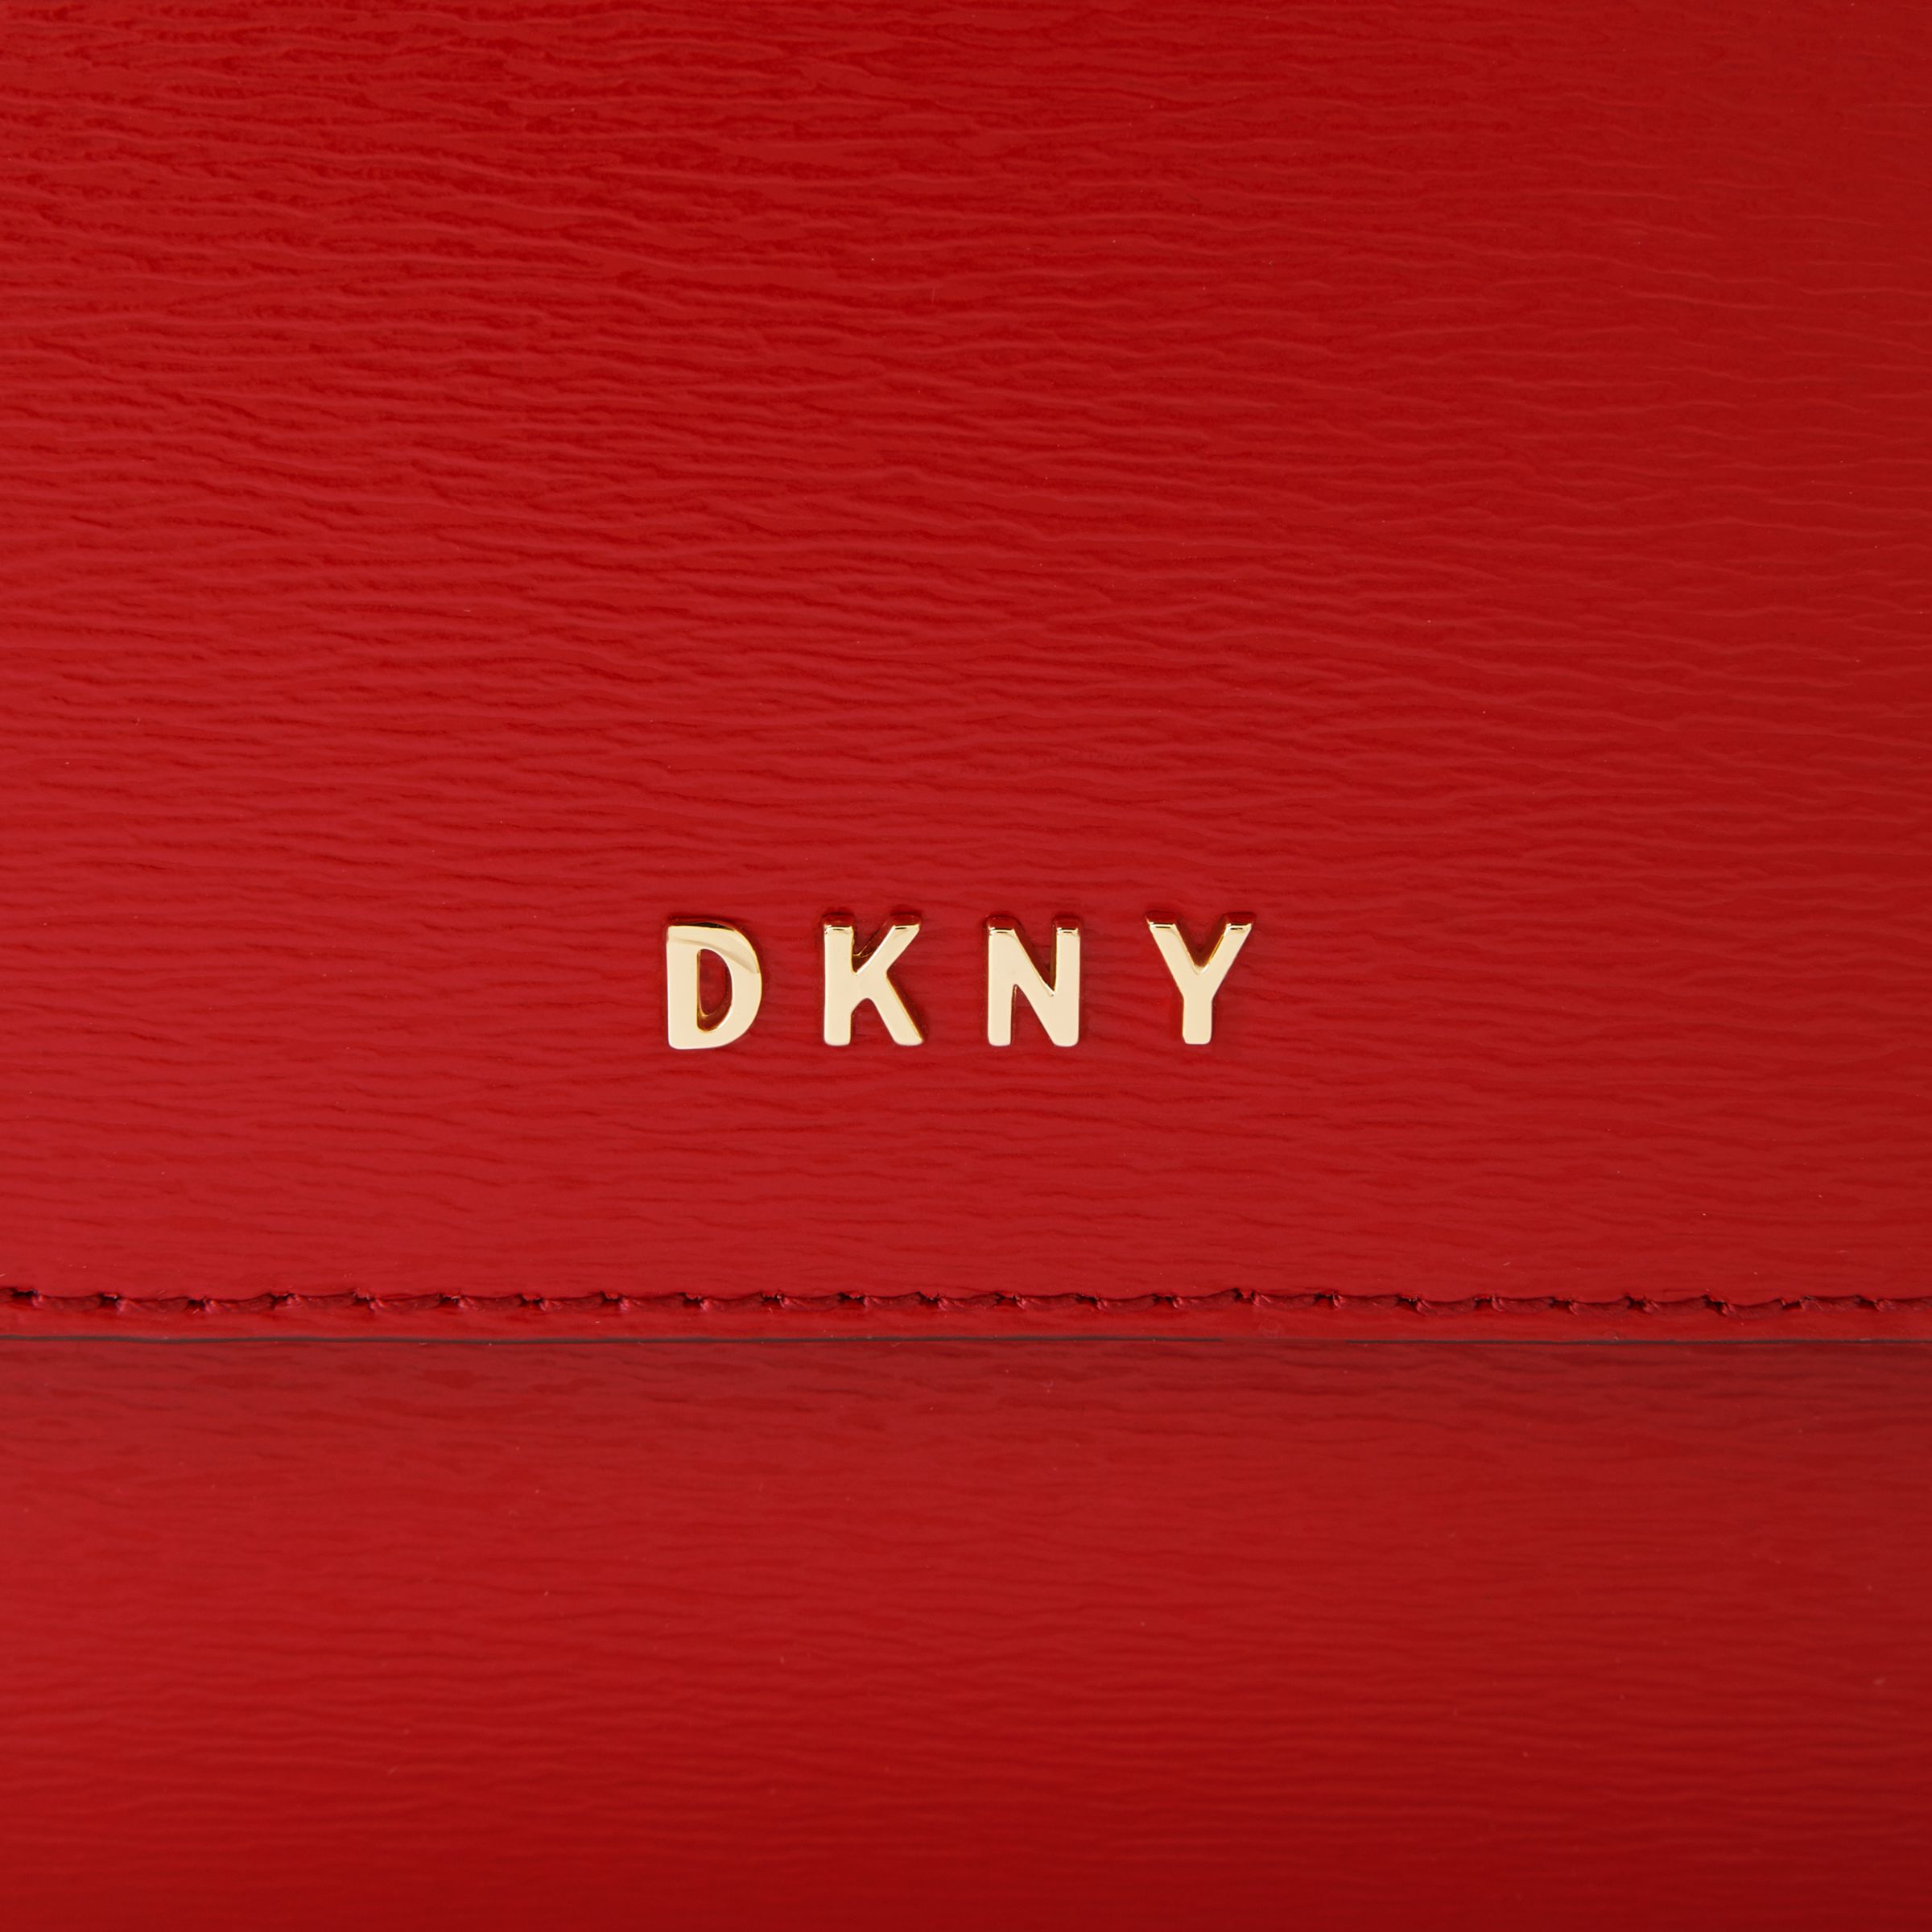 Dkny Bryant Leather Top Zip Backpack - Bright Red